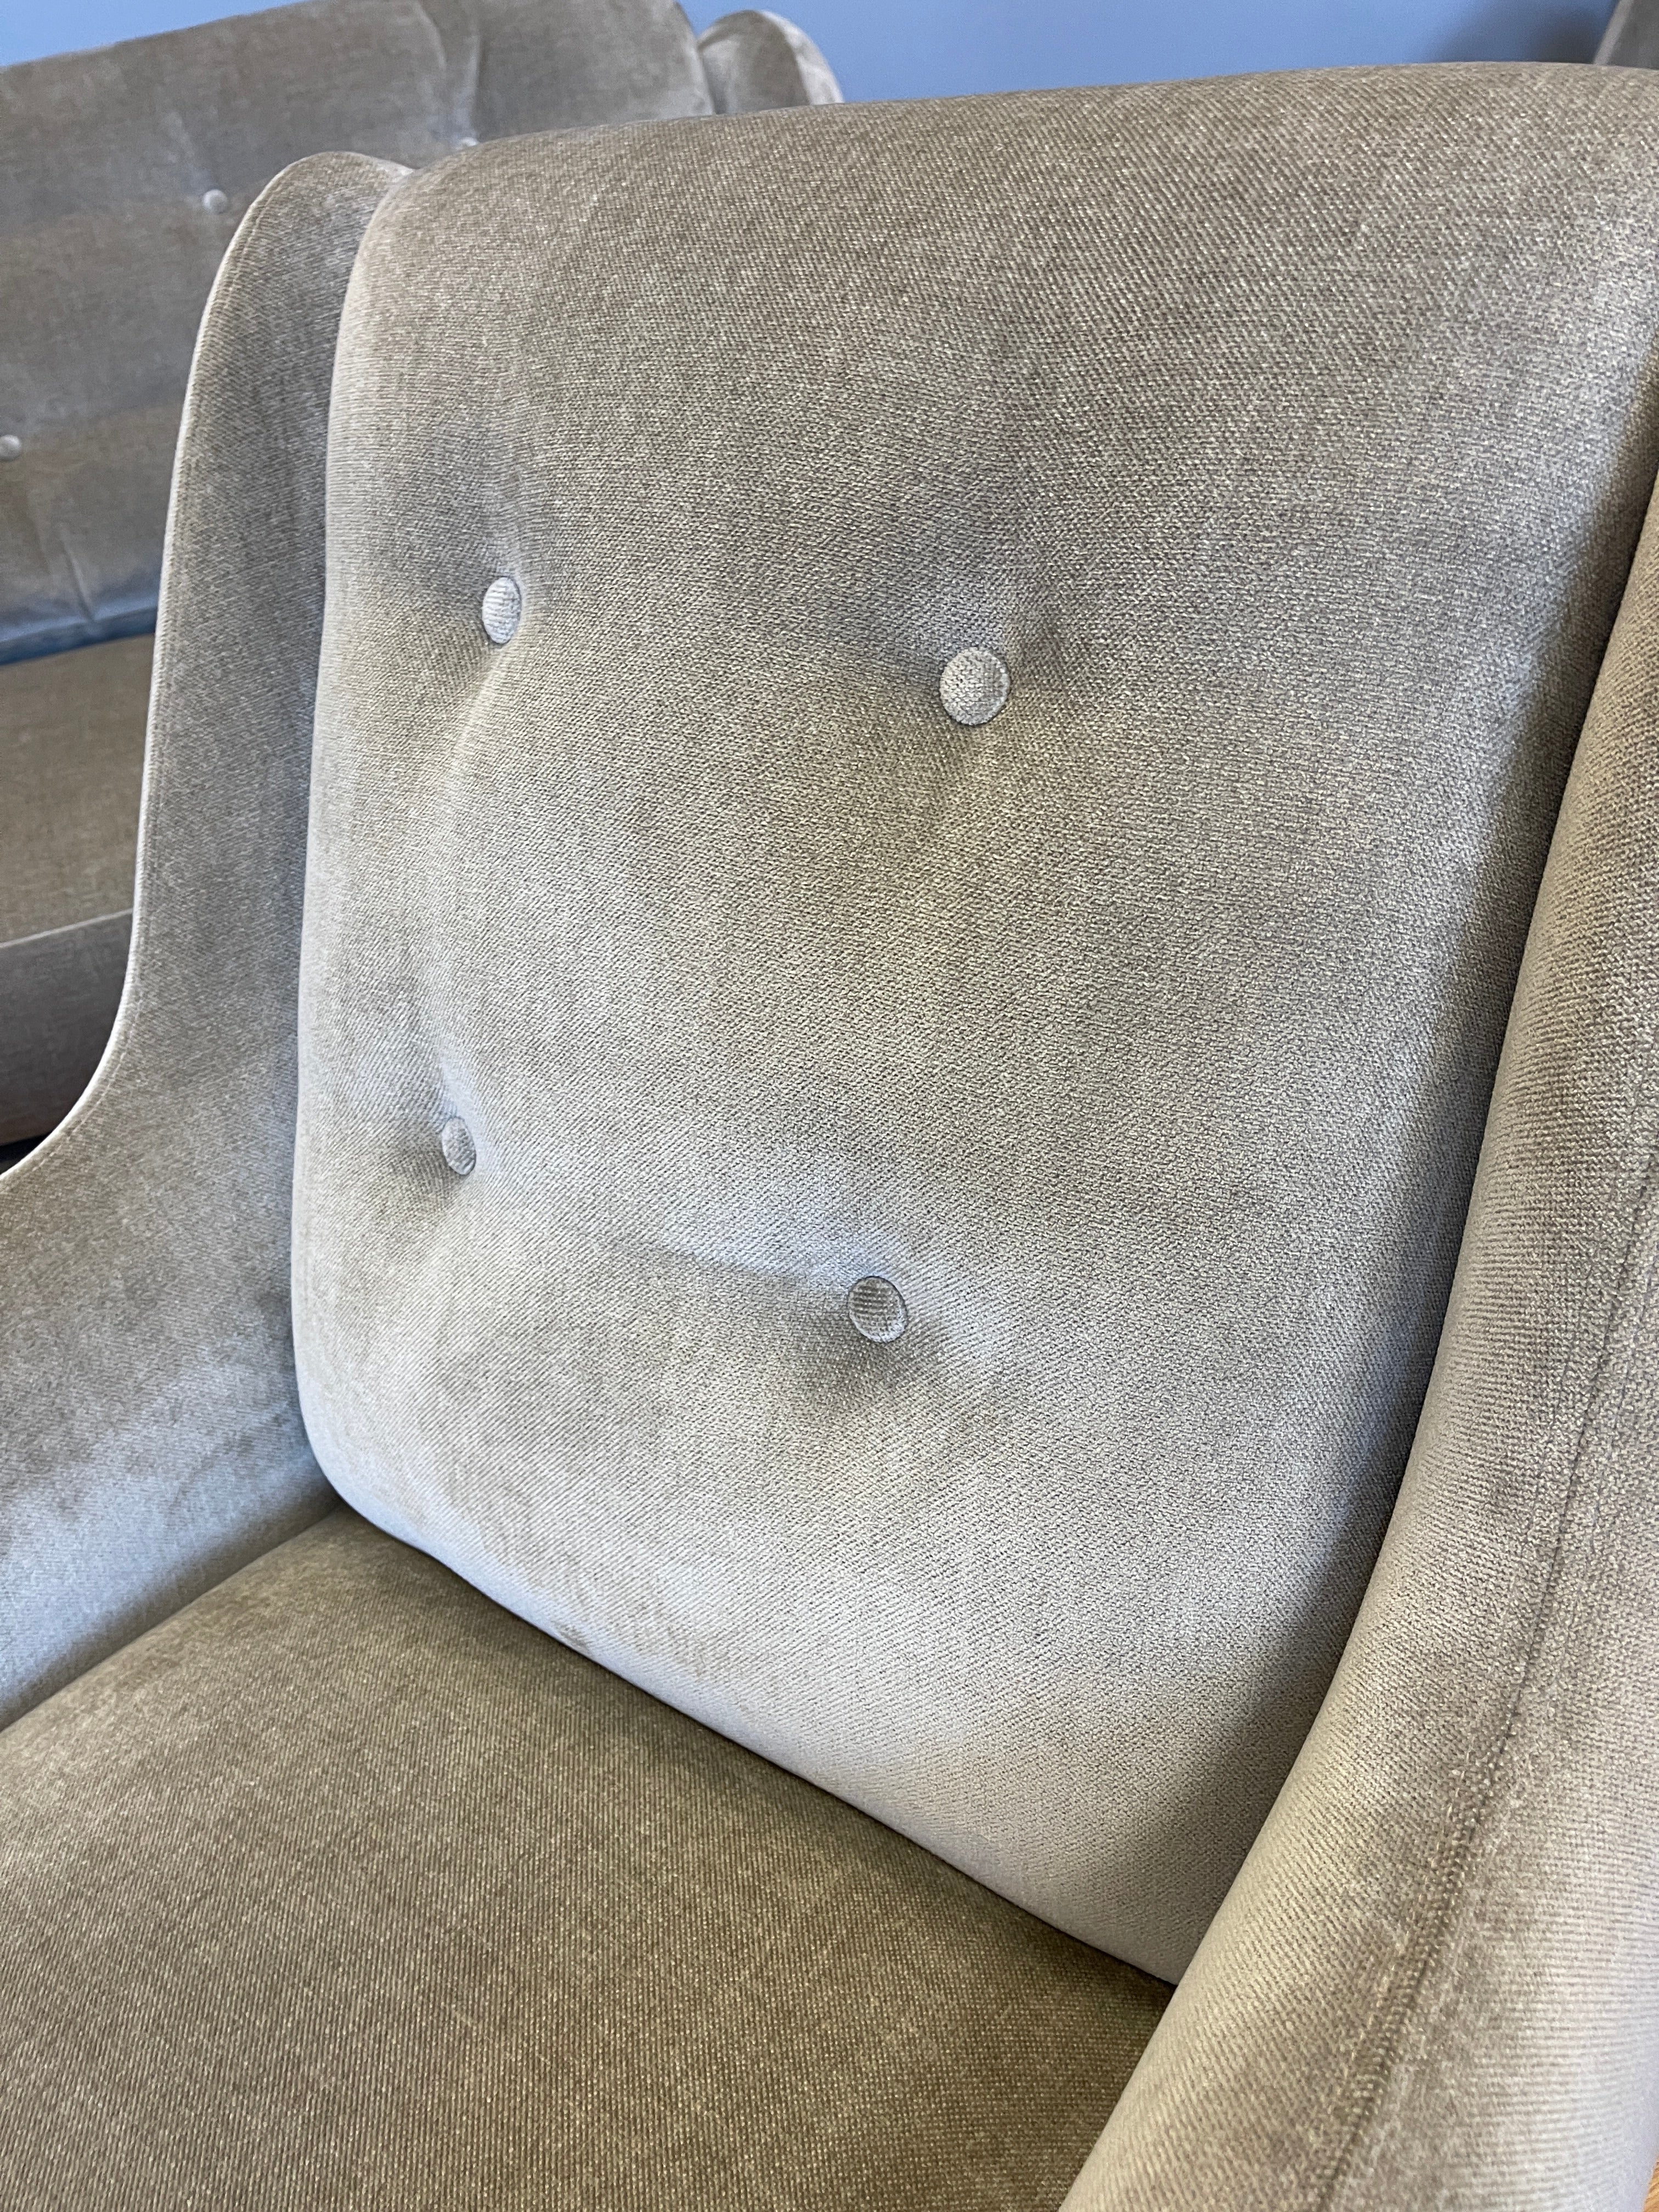 FRENCH CONNECTION CAMDEN accent chair in taupe / champagne chenille fabric